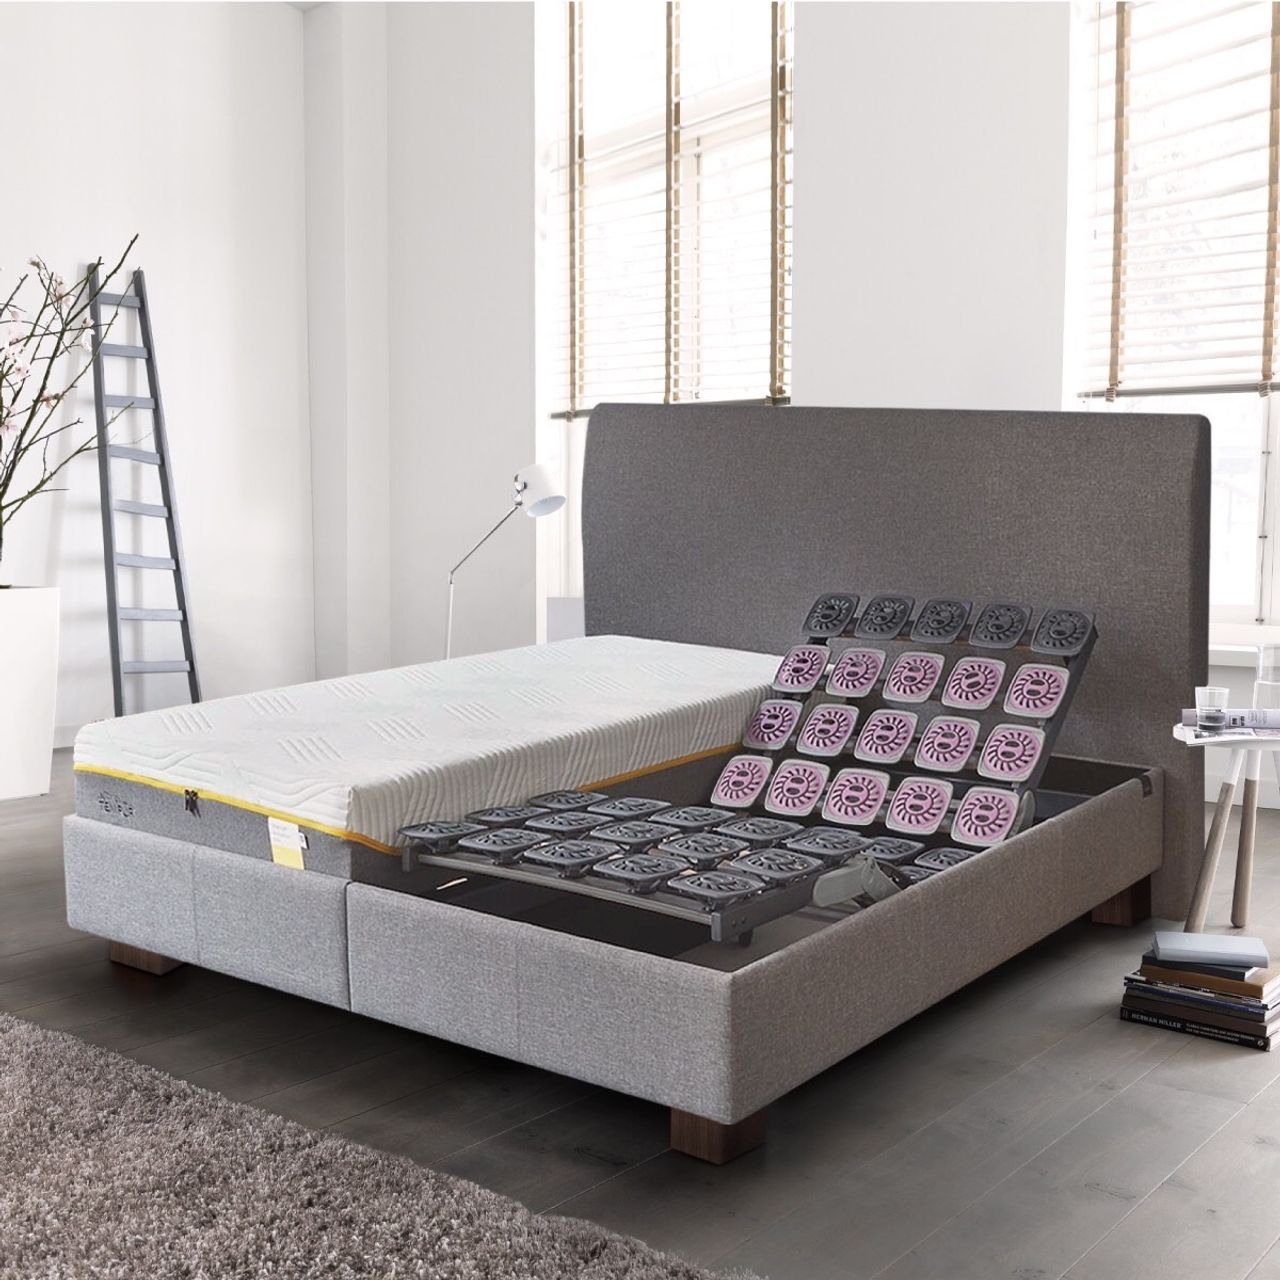 Find the Bed solution Perfect For You